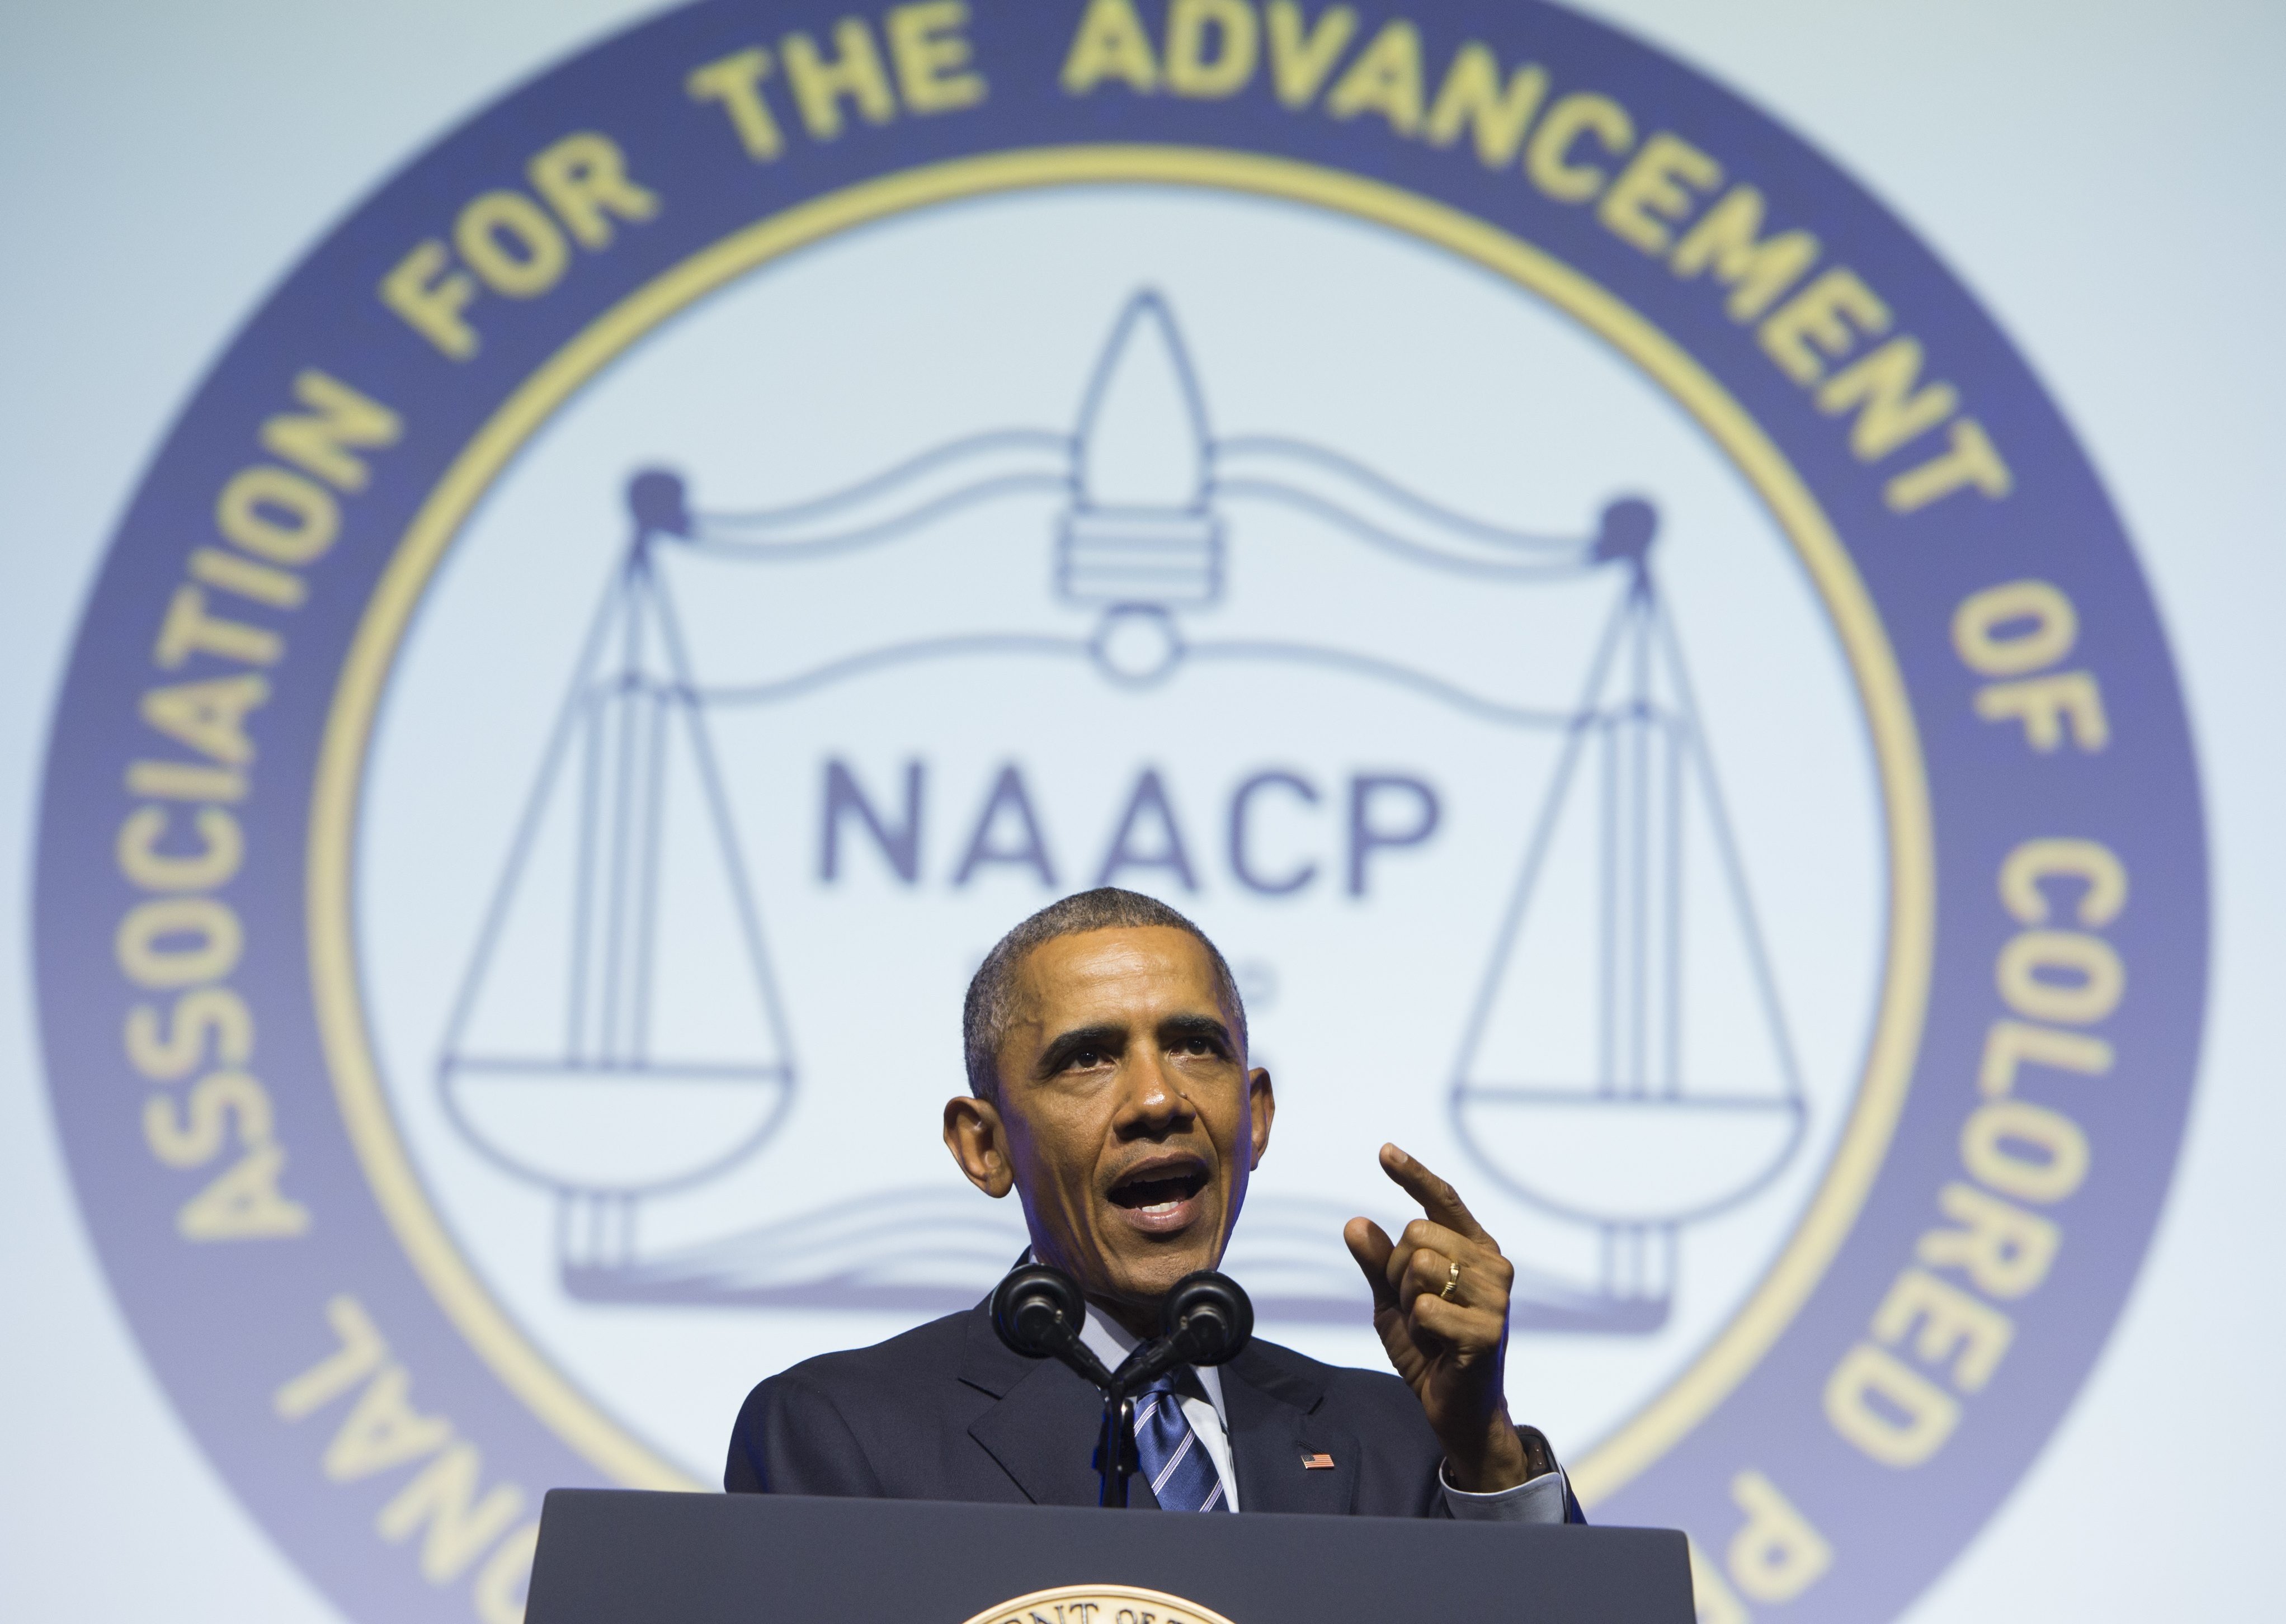 President Barack Obama speaks during the NAACP's 106th National Convention in Philadelphia on July 14, 2015. (Saul Loeb—AFP/Getty Images)